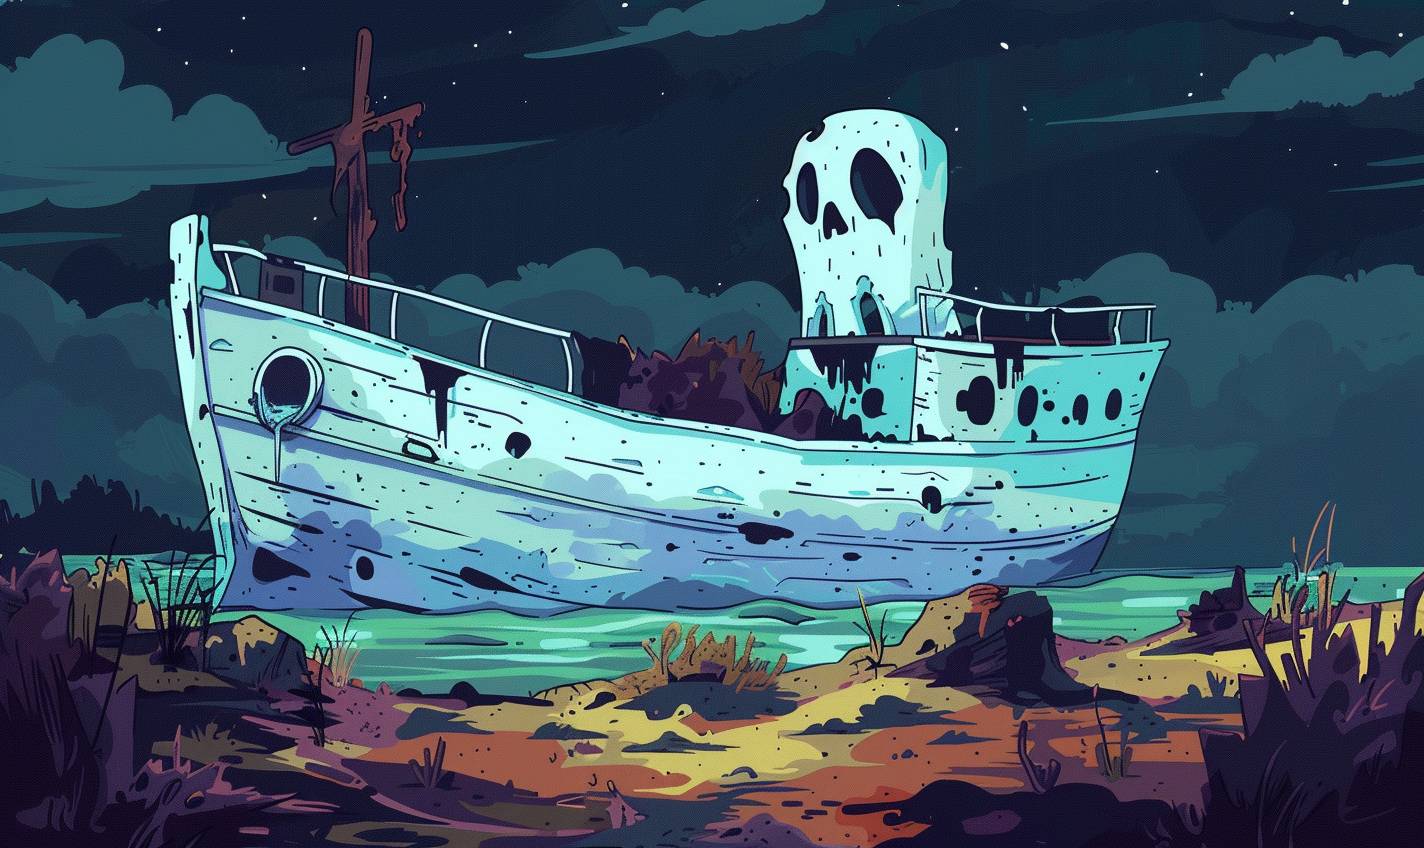 In the style of Allie Brosh, a ghostly shipwreck on a haunted shore